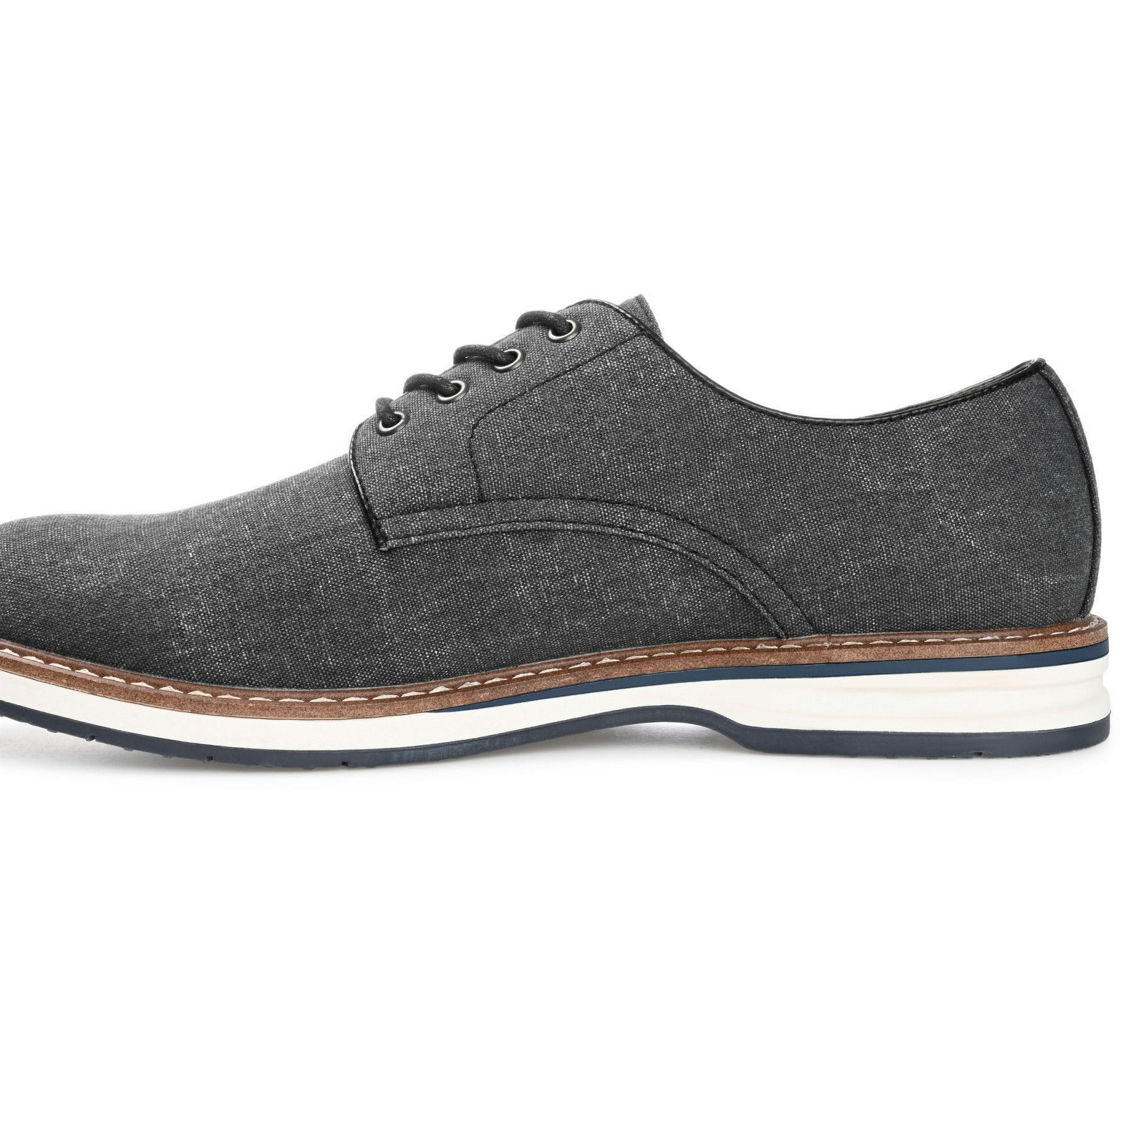 Vance Co. Ammon Textile Casual Dress Shoe - Image 4 of 4